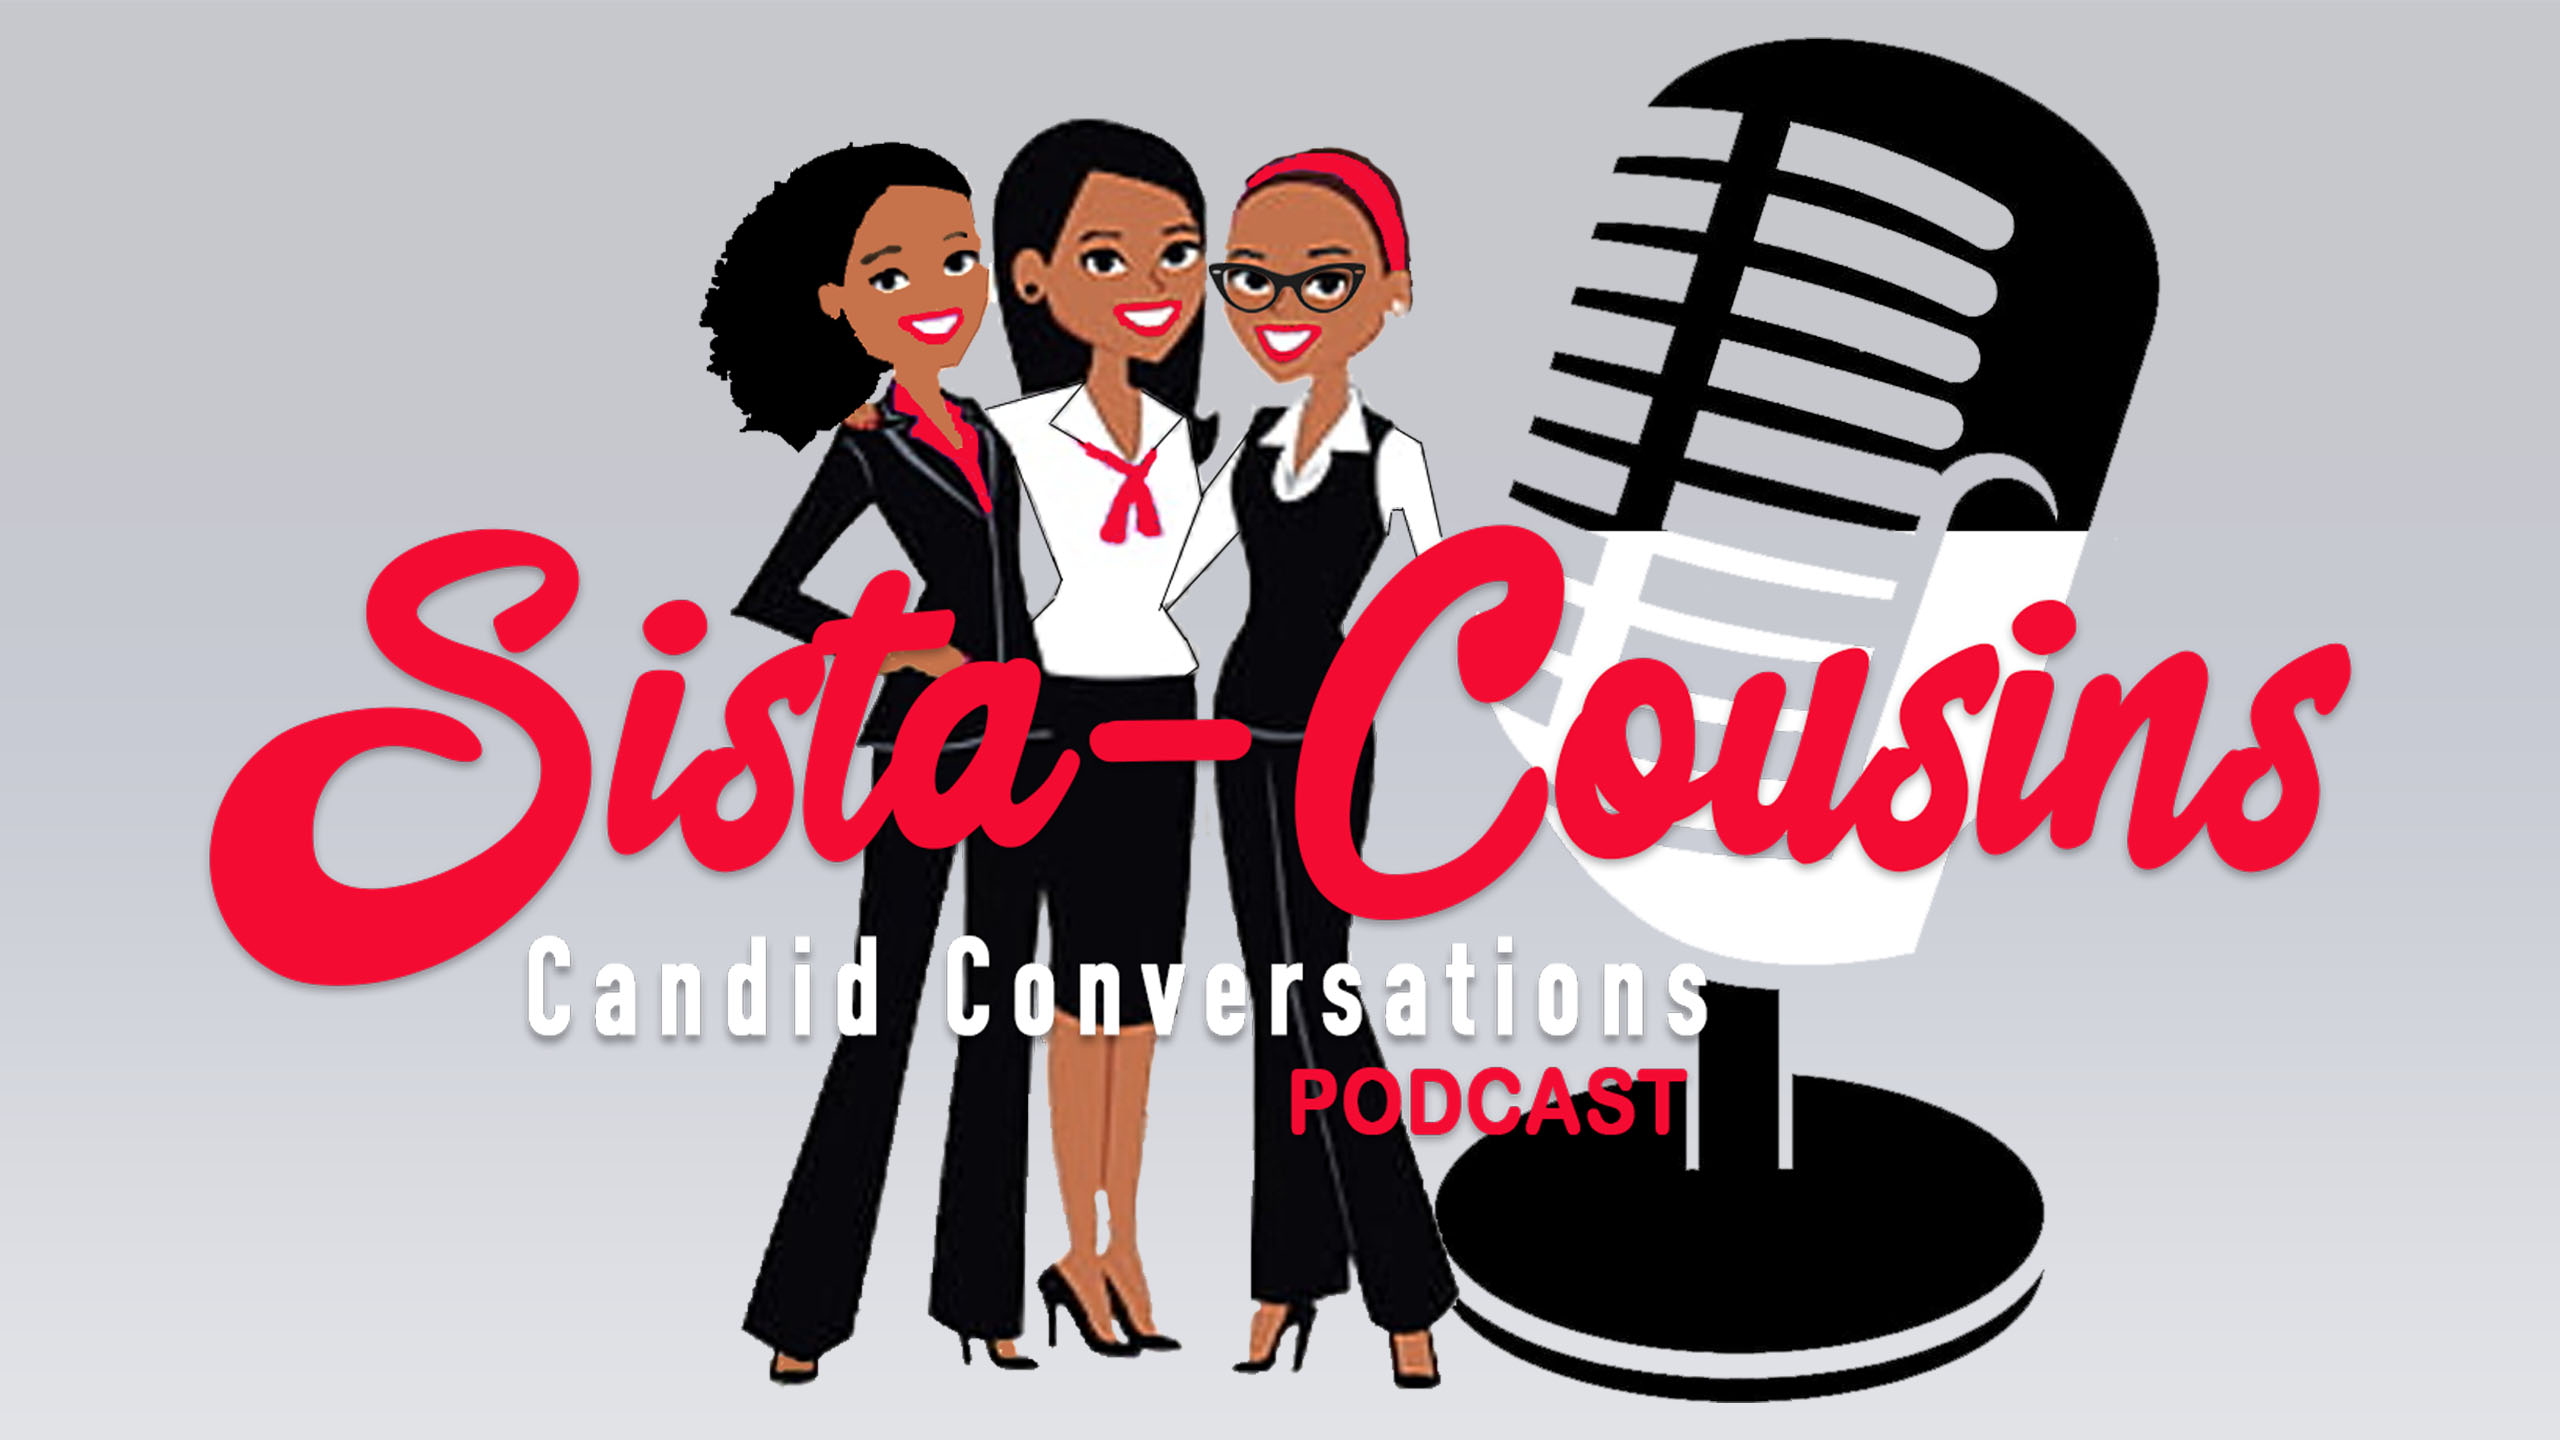 The Sista-Cousins Podcast